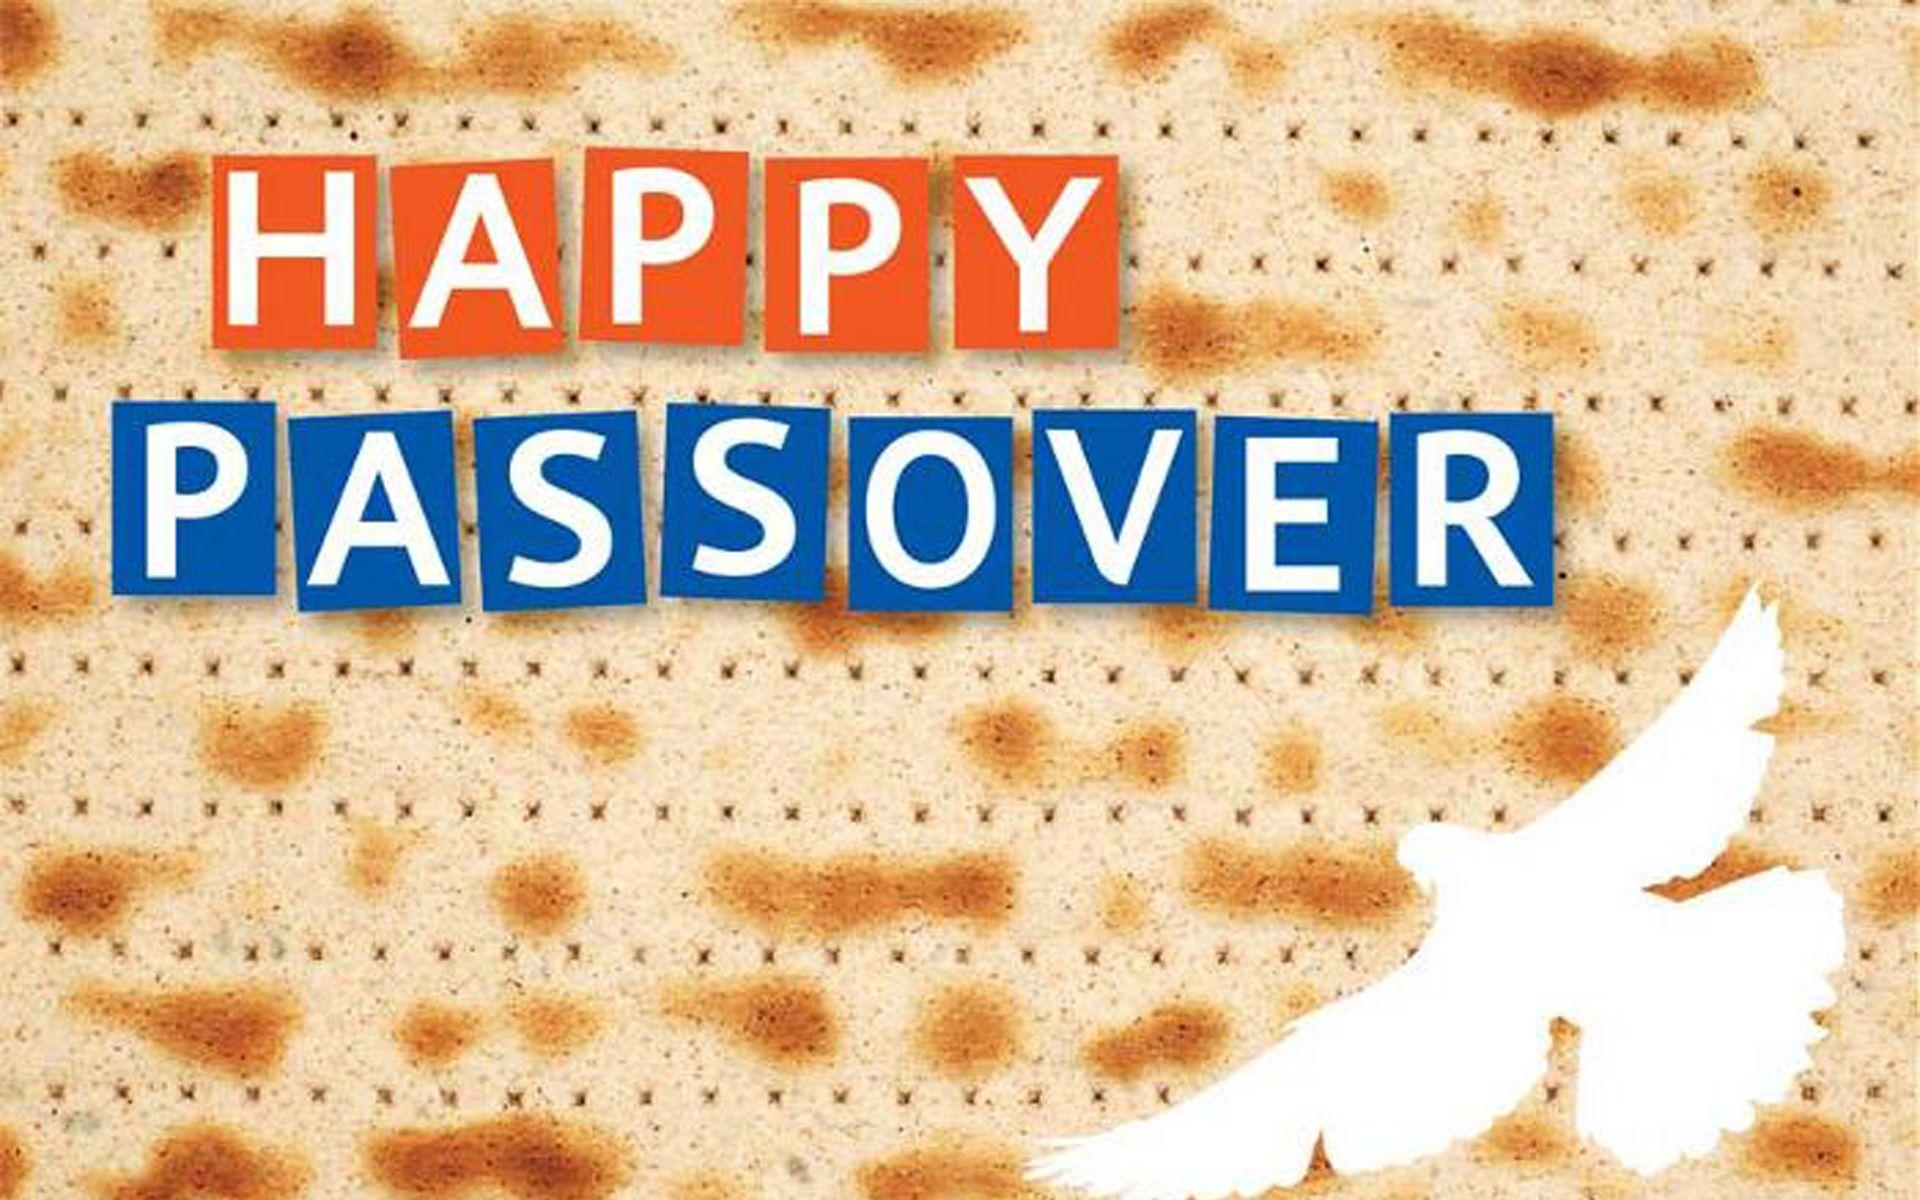 Passover. Emerson Parkside Academy PTA